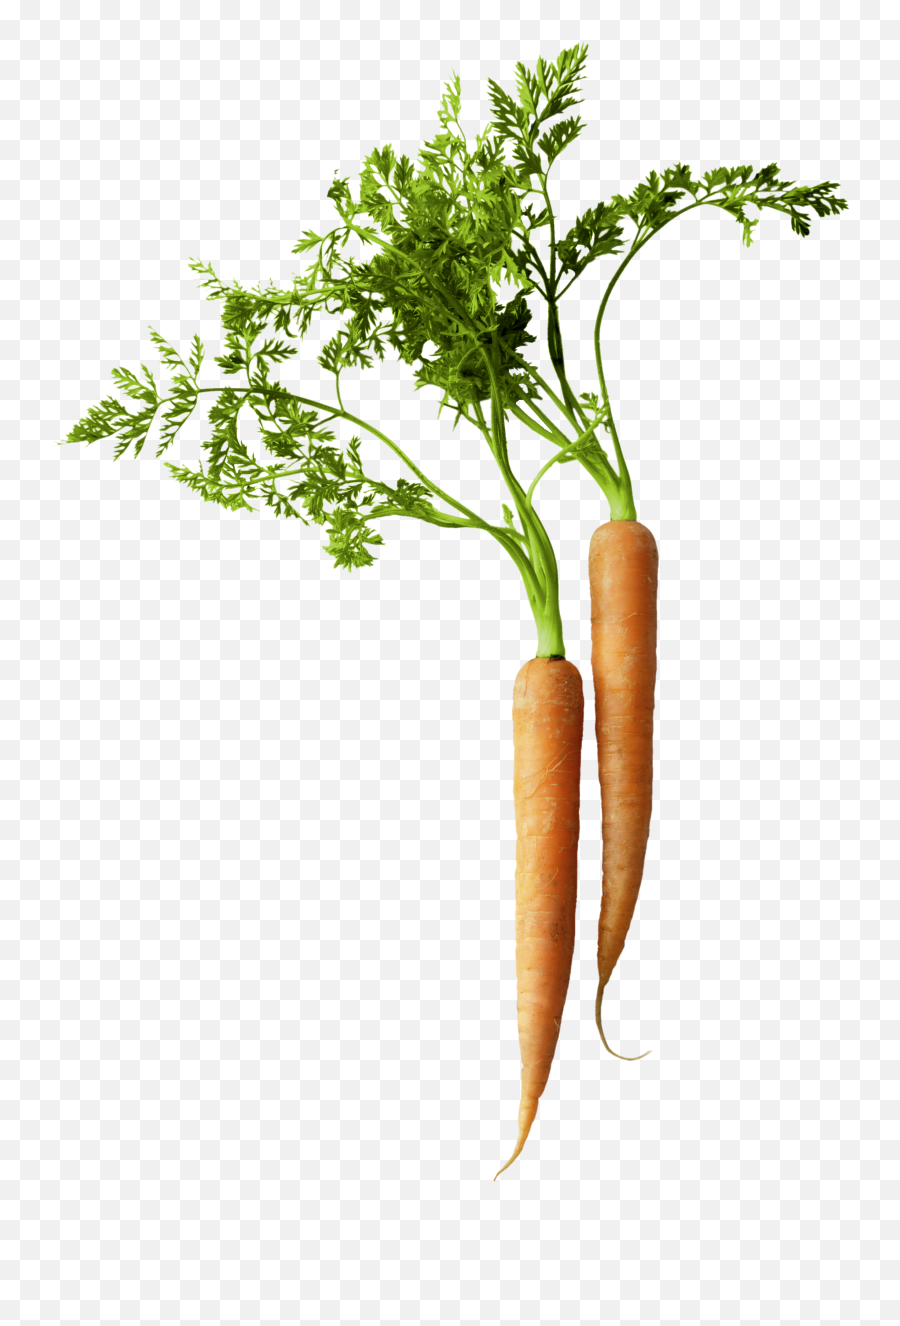 Carrot Png Images Carrots Clipart Free - Carrot Emoji,Carrot Transparent Background